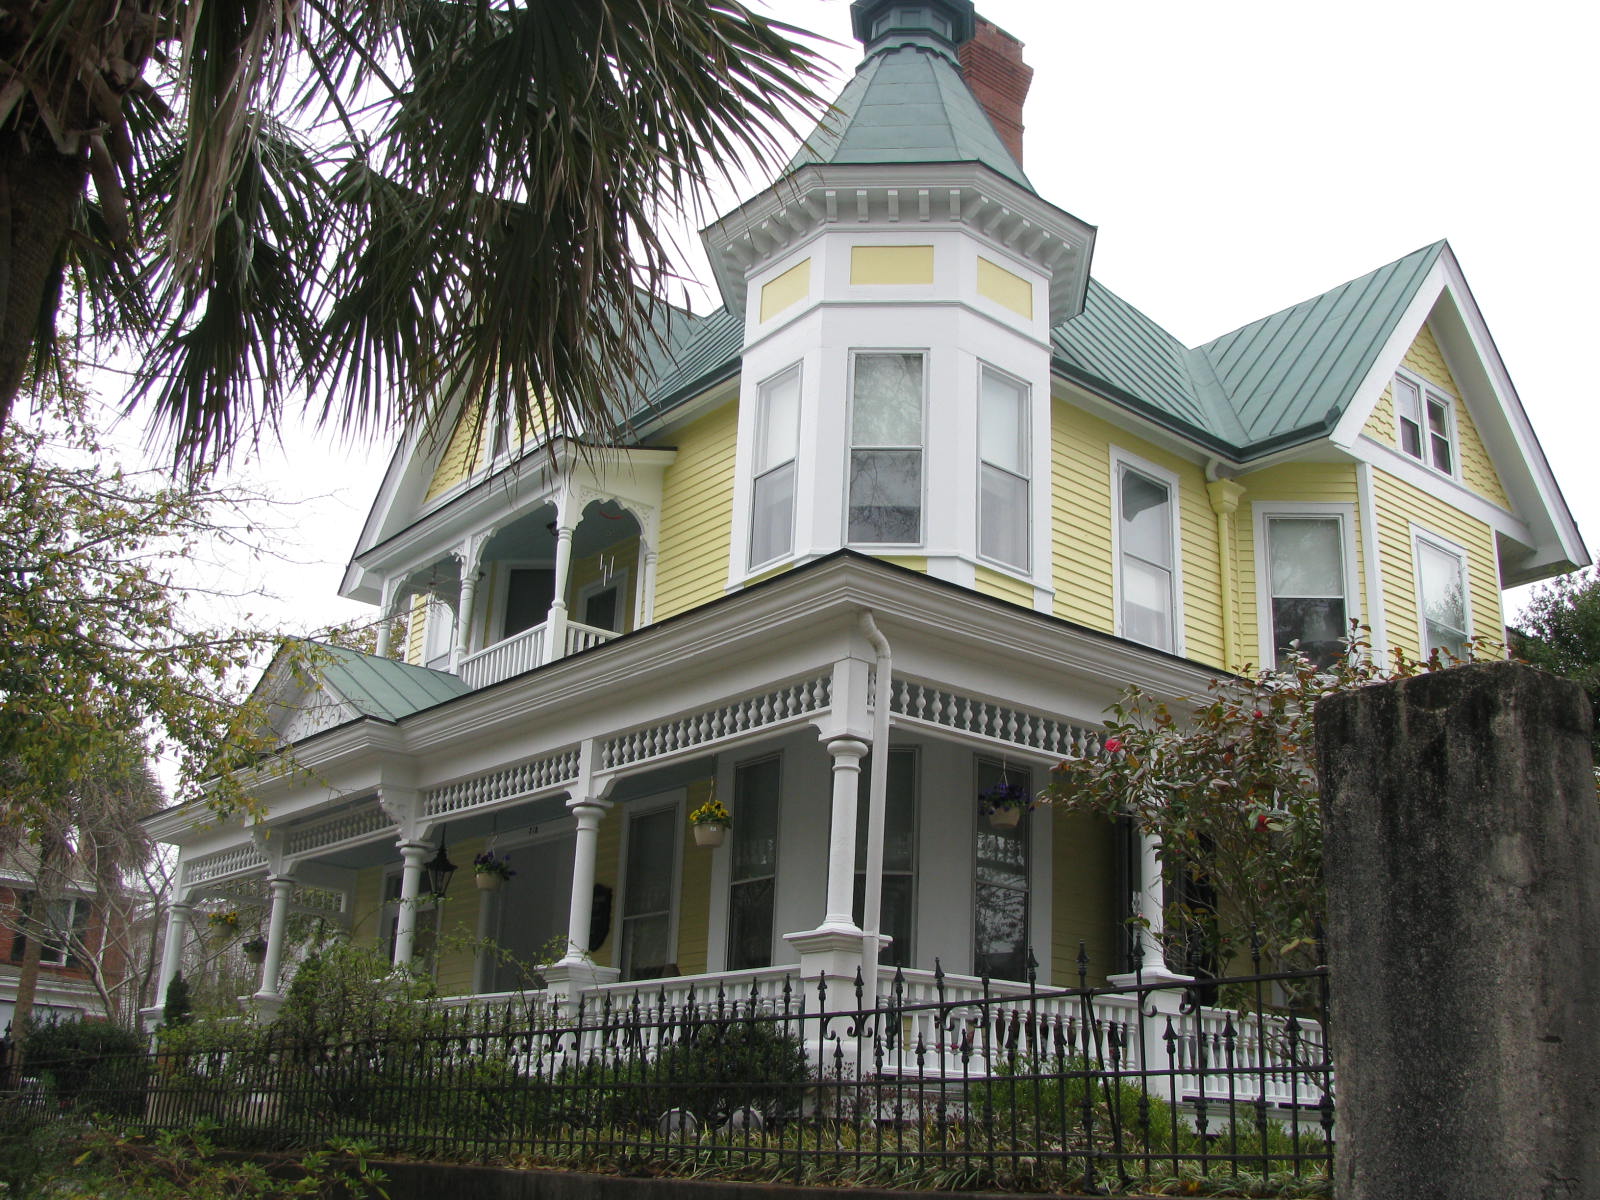 Historic Homes In Wilmington Nc - Homemade Ftempo